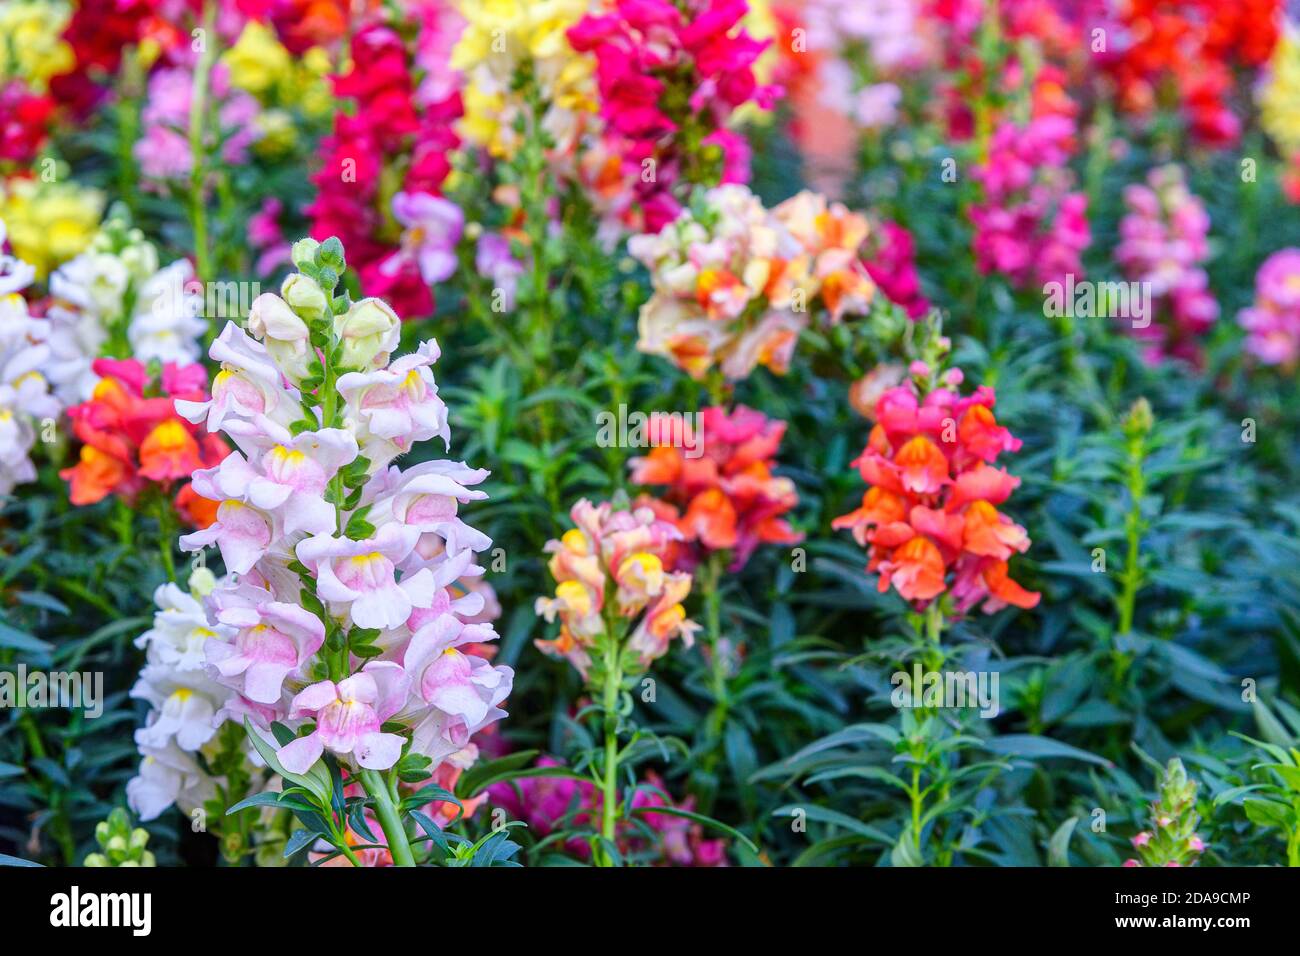 Beautiful Antirrhinum majus dragon flower also known as Snap Dragons and Tagetes patula (French Marigolds) is blooming in the garden. Stock Photo